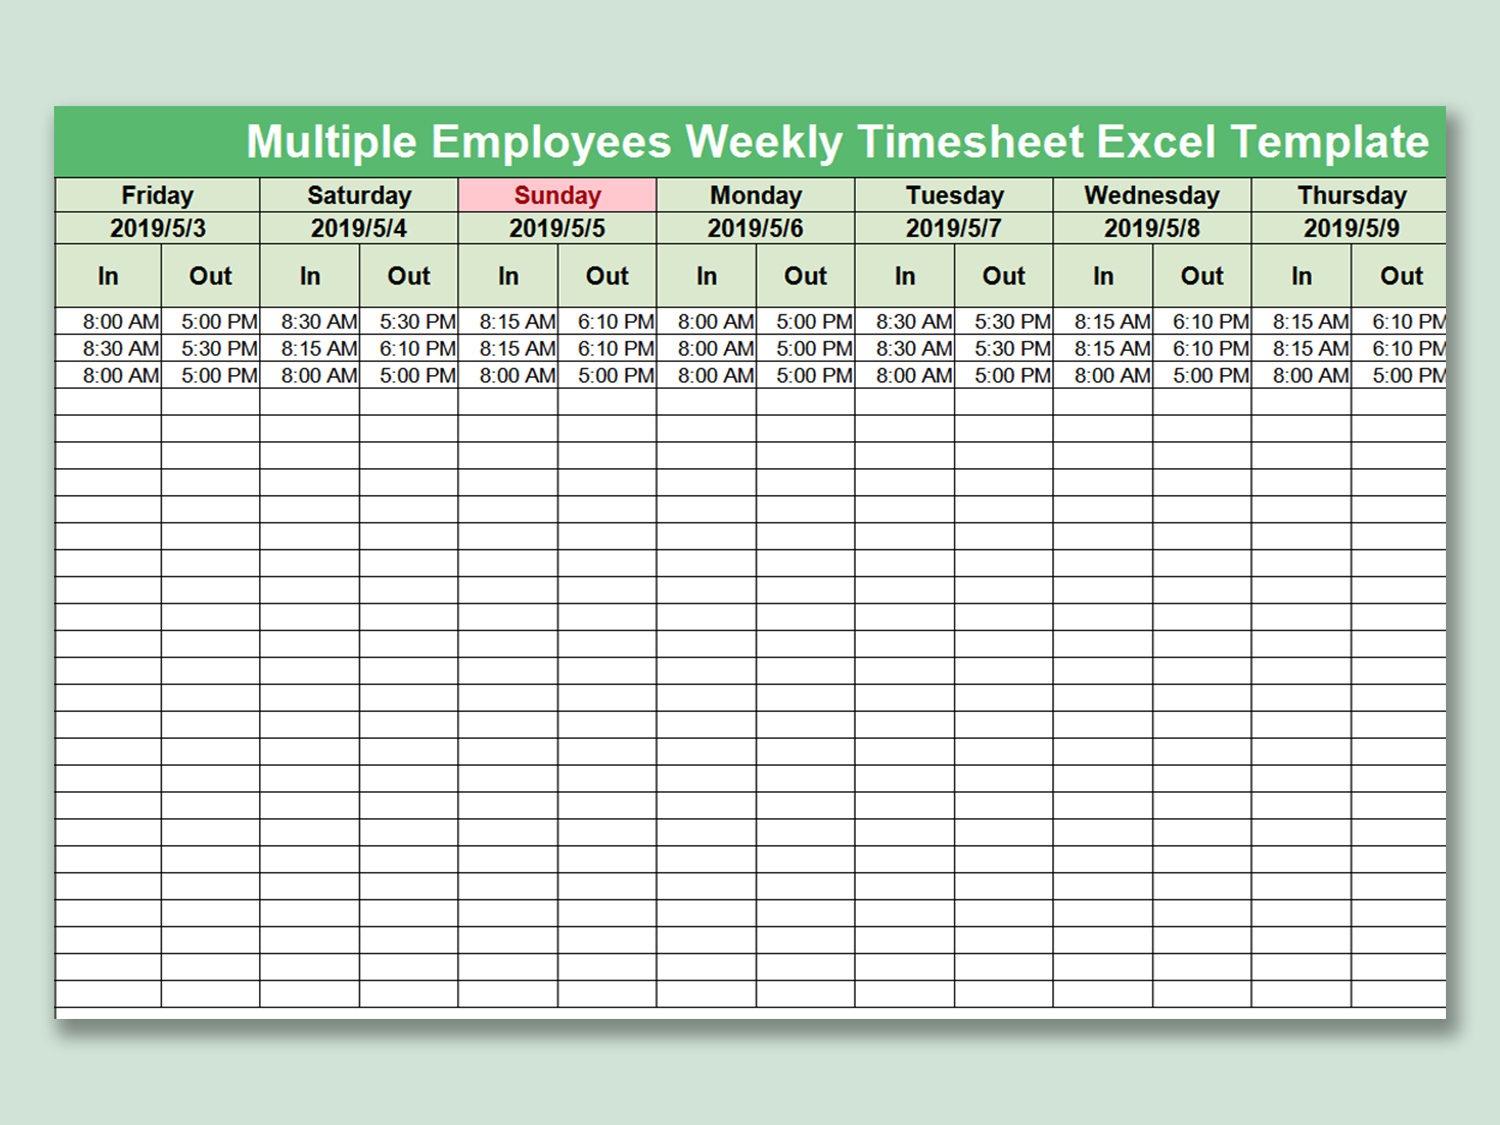 EXCEL Of Multiple Employees Weekly Timesheet xlsx WPS Free Templates